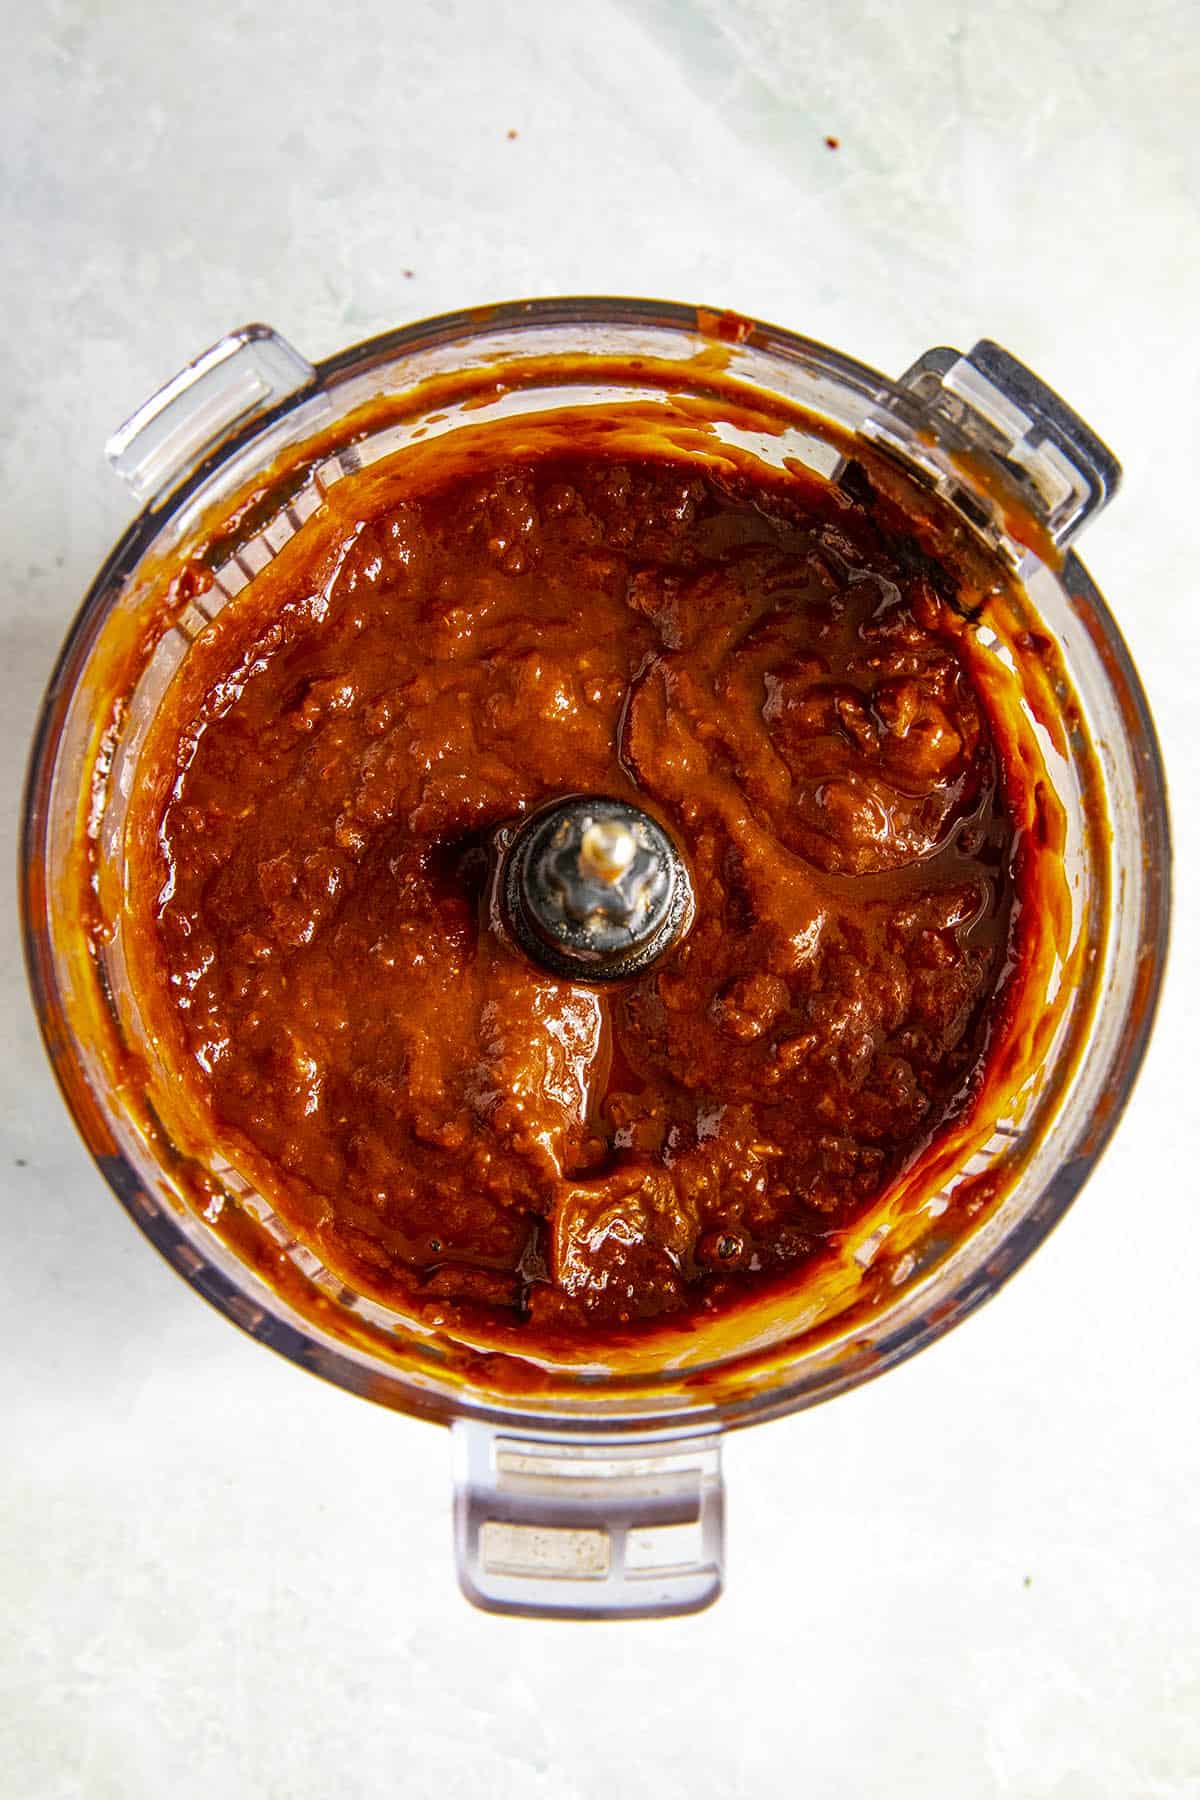 Processed red chili sauce in a food processor for Pozole Rojo